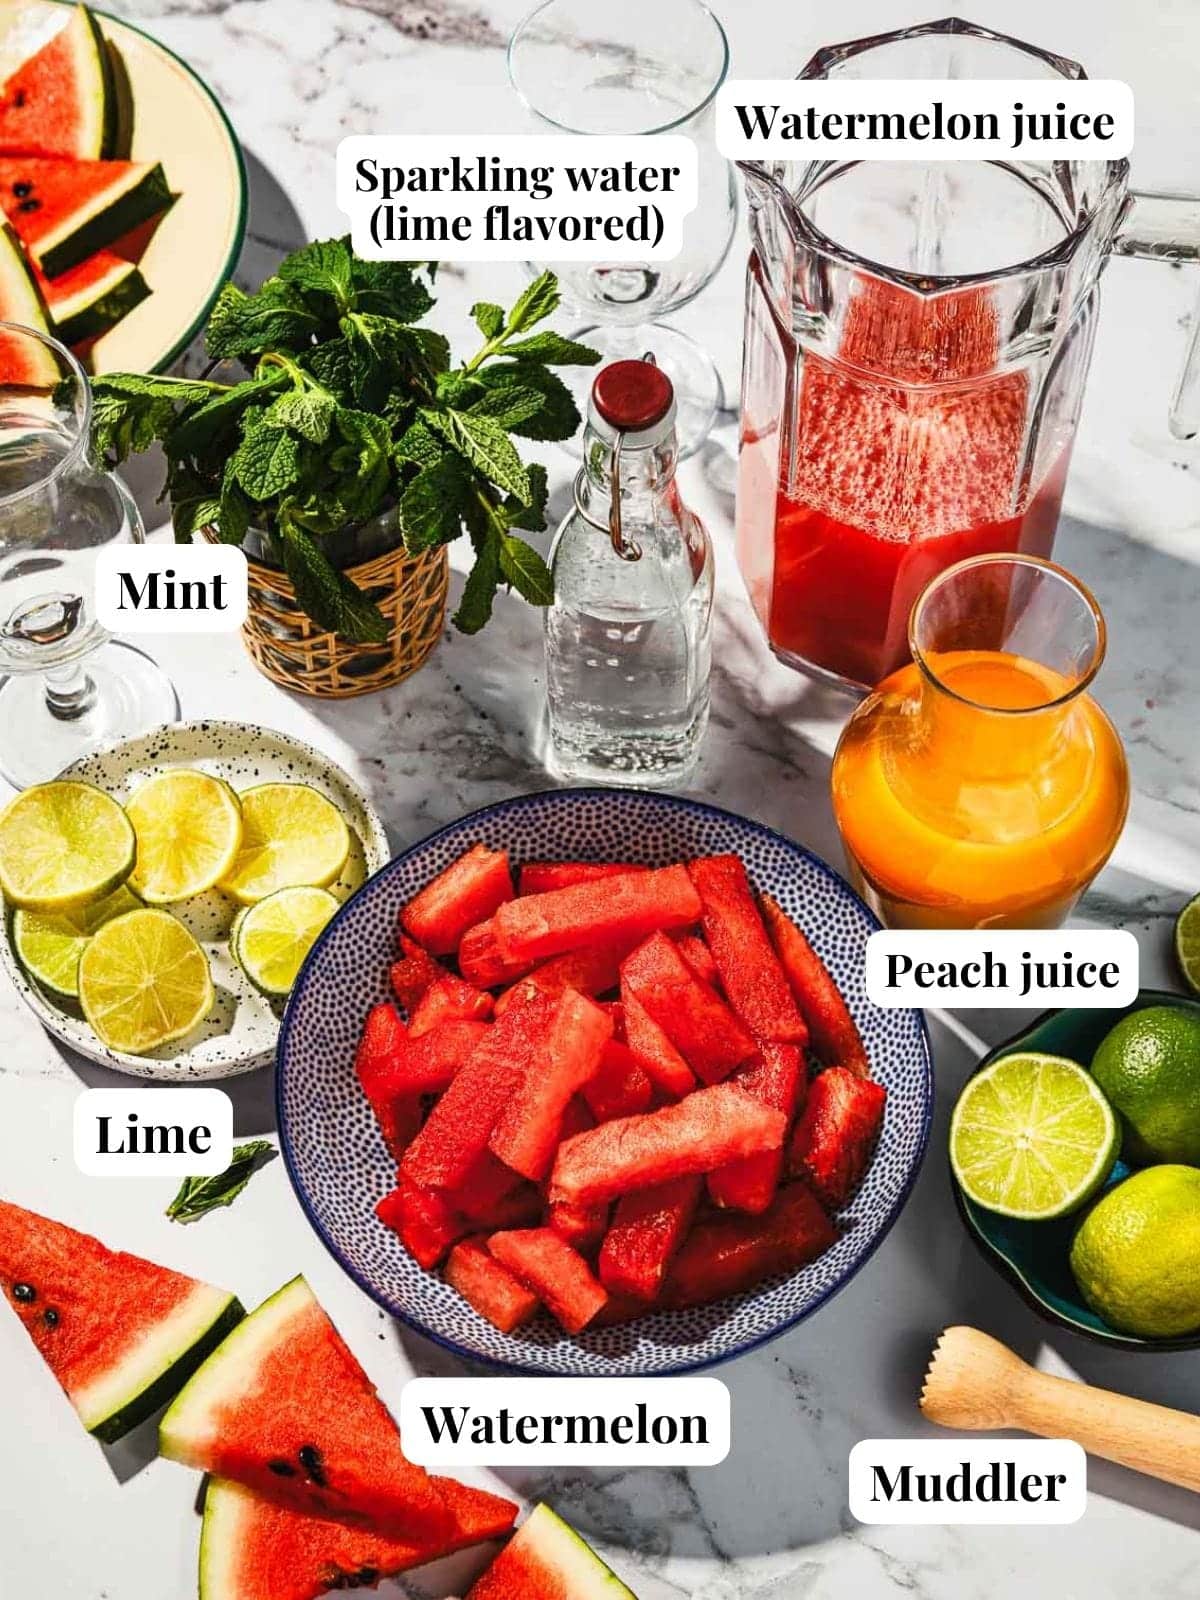 Image shows ingredients needed to make this non-alcoholic drink with watermelon.